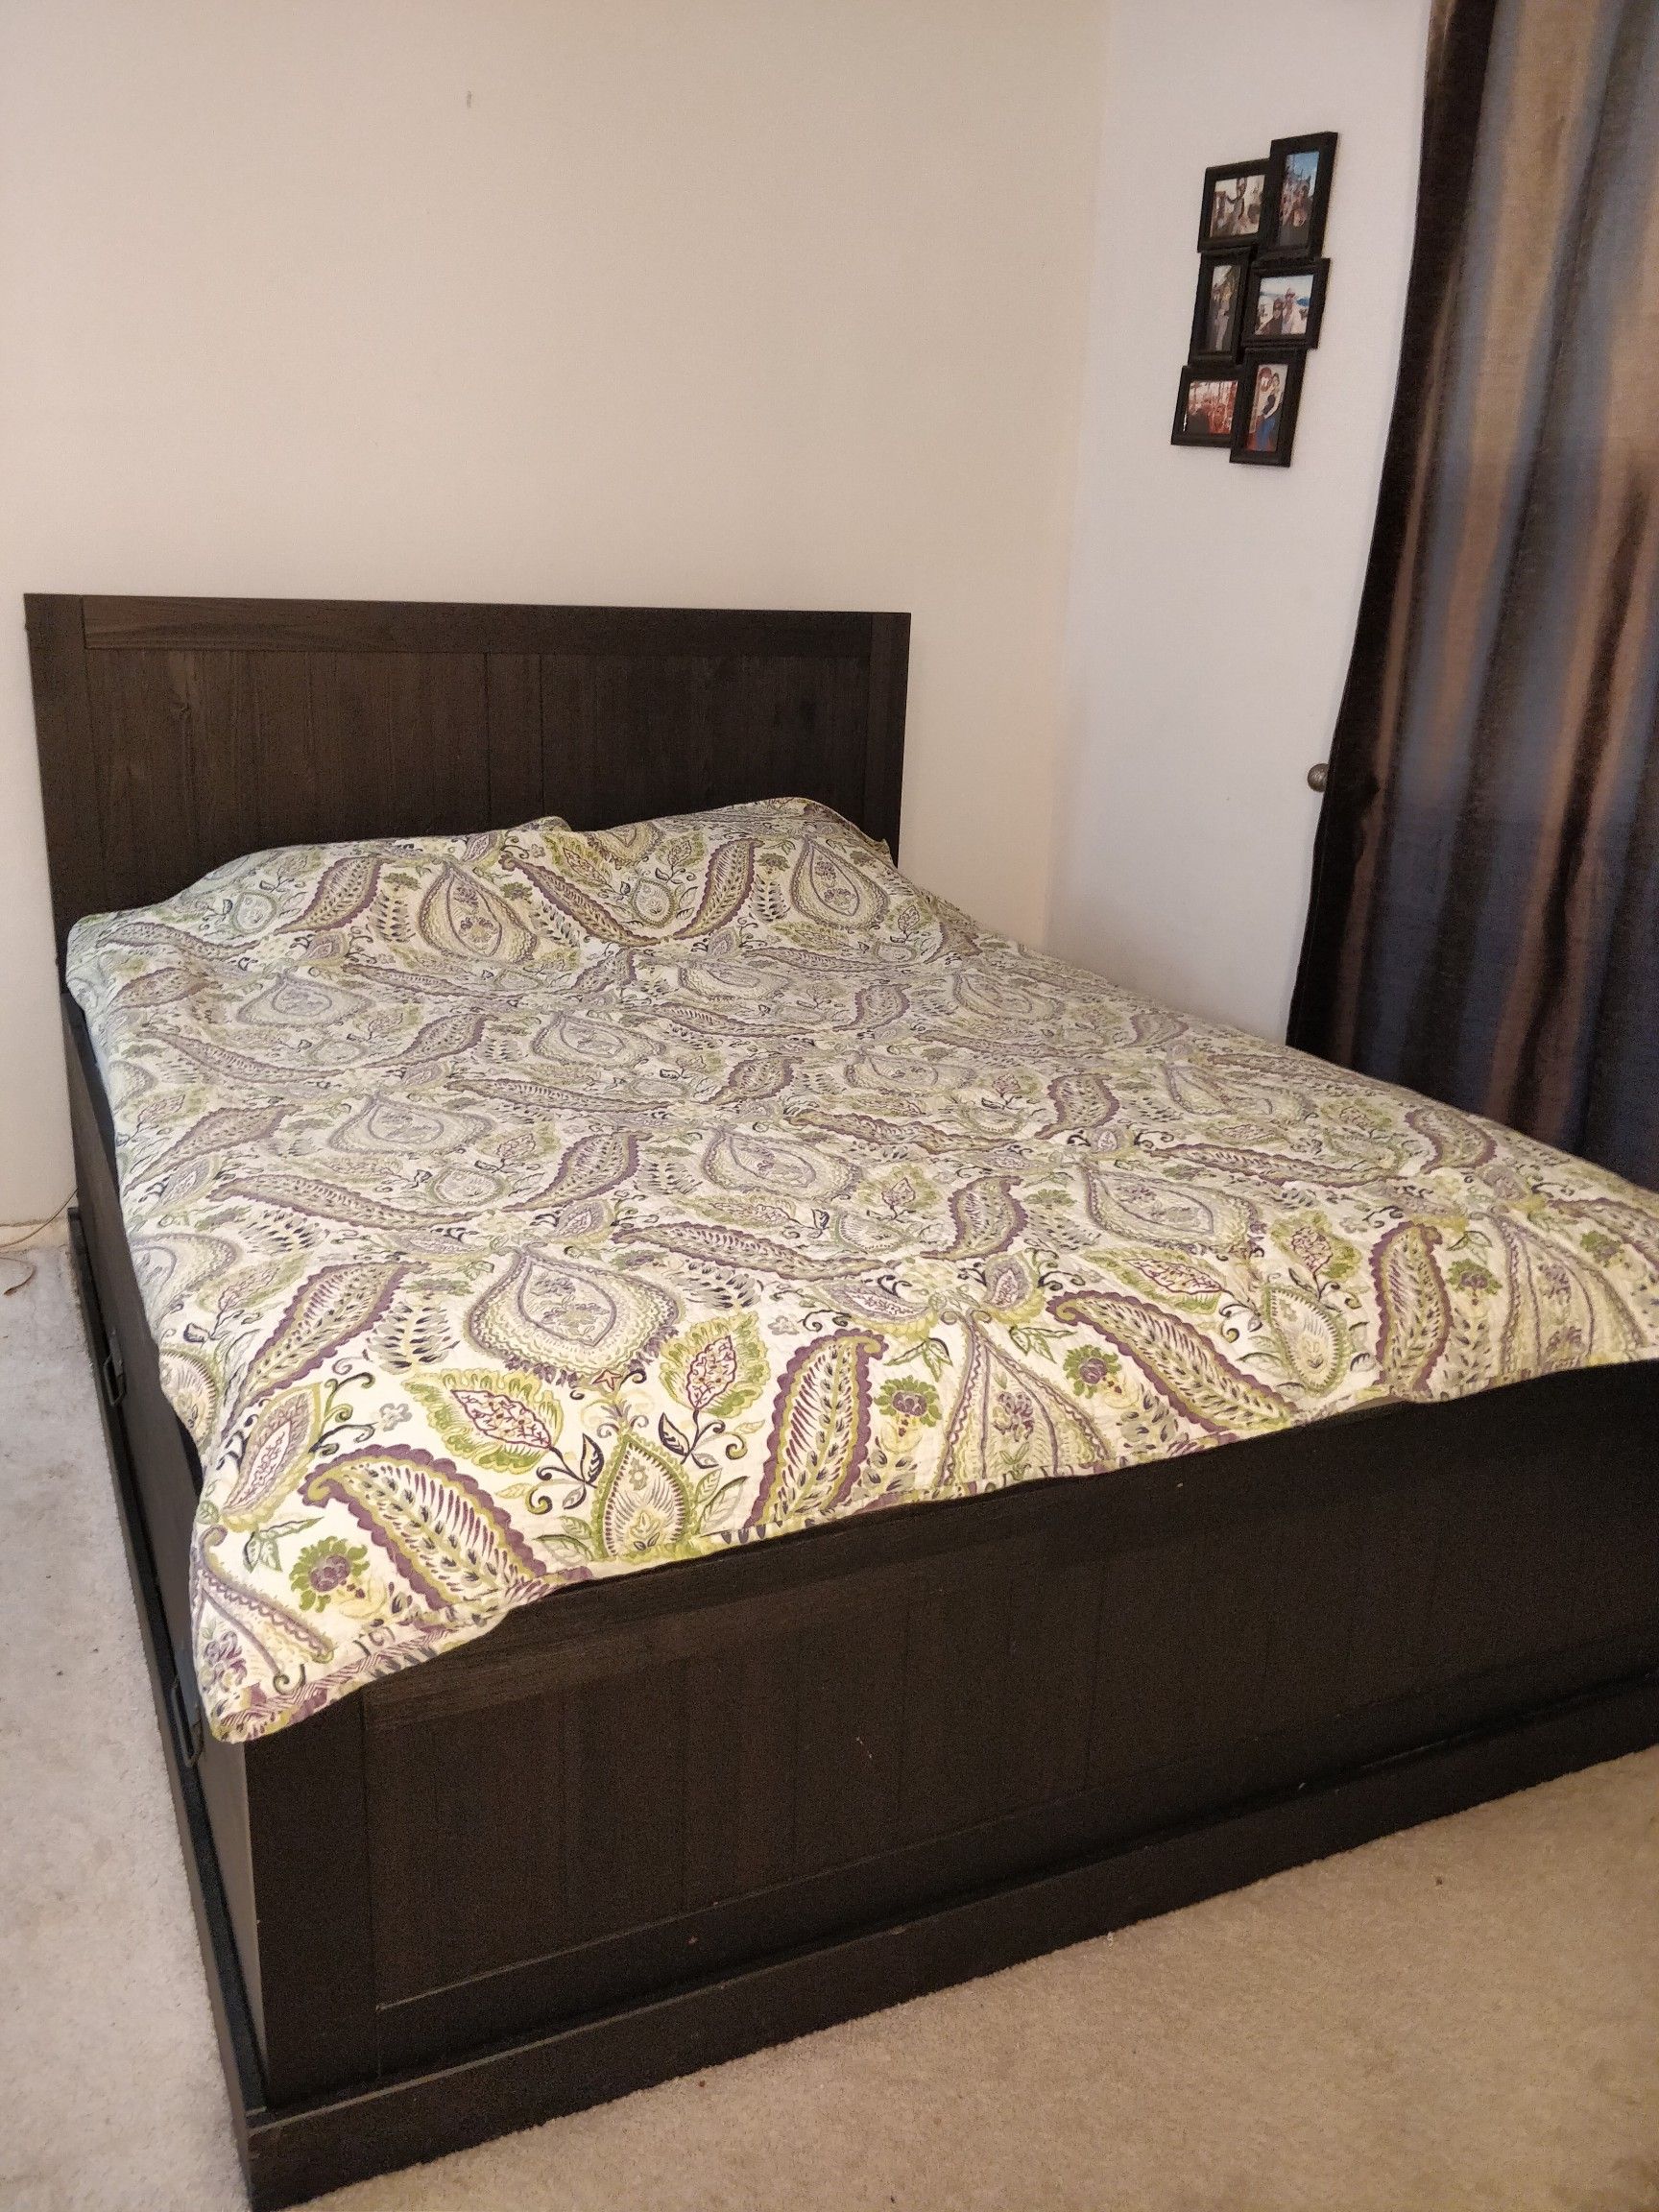 Solid wood Queen bed frame with 4 big side drawers and mattress in very good condition, pet free smoke free.